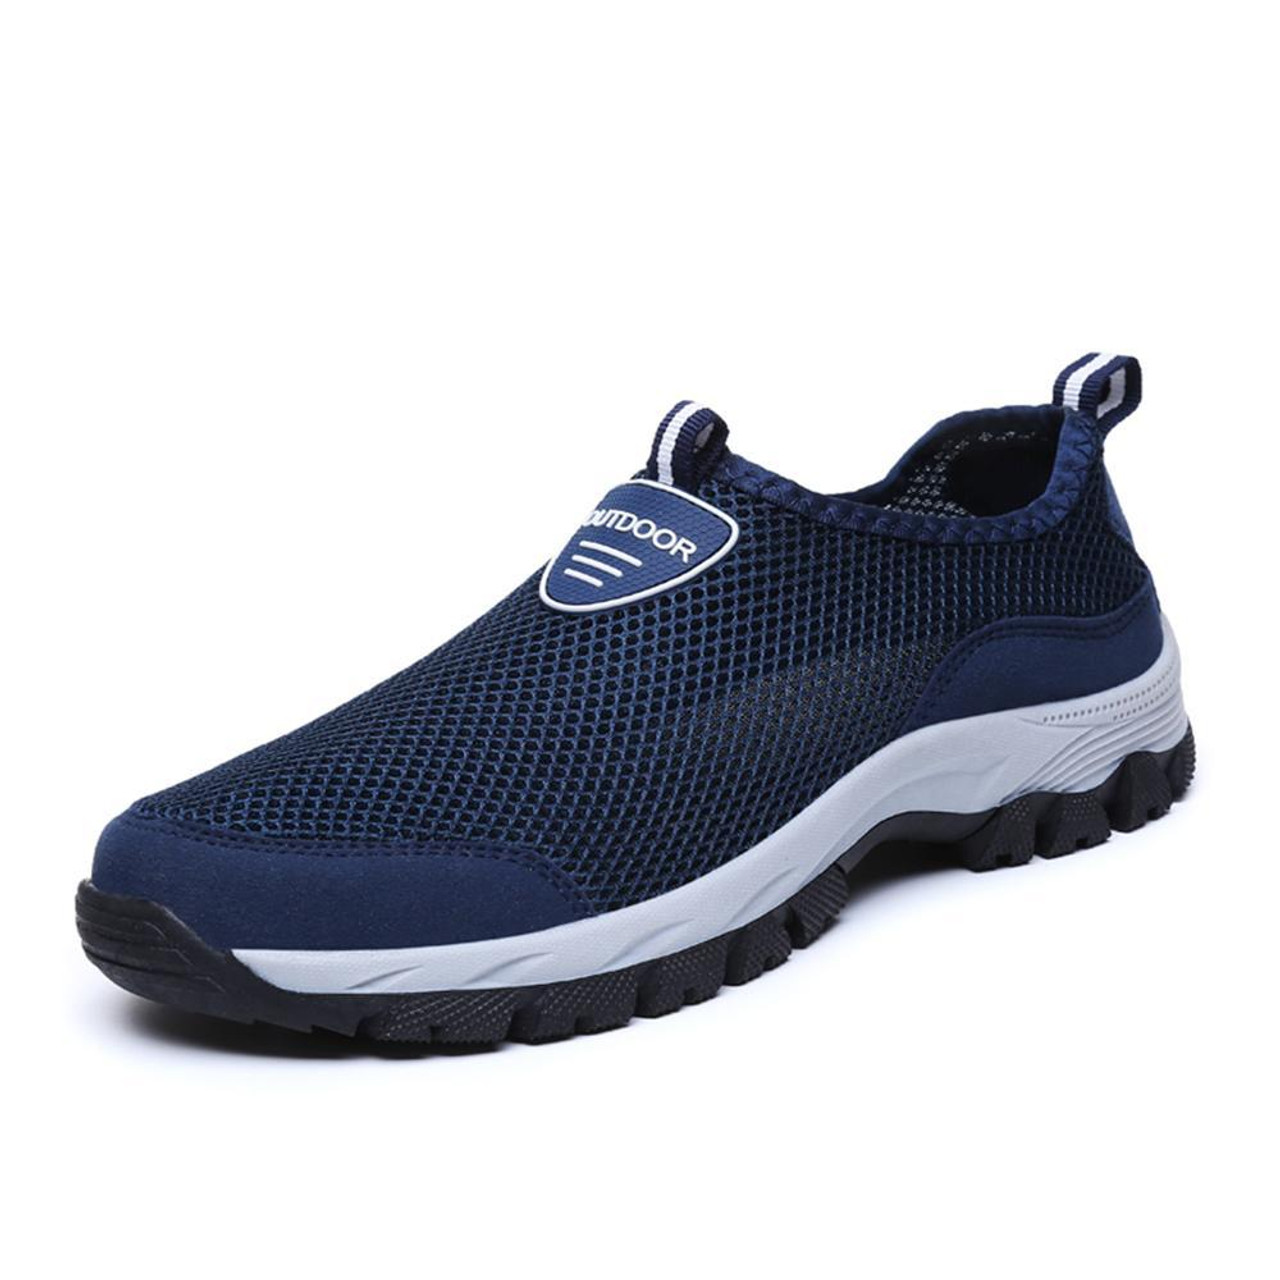 Mens Outdoor Sneakers Water Shoes Mesh Breathable Slip on Flats Hiking Casual SZ